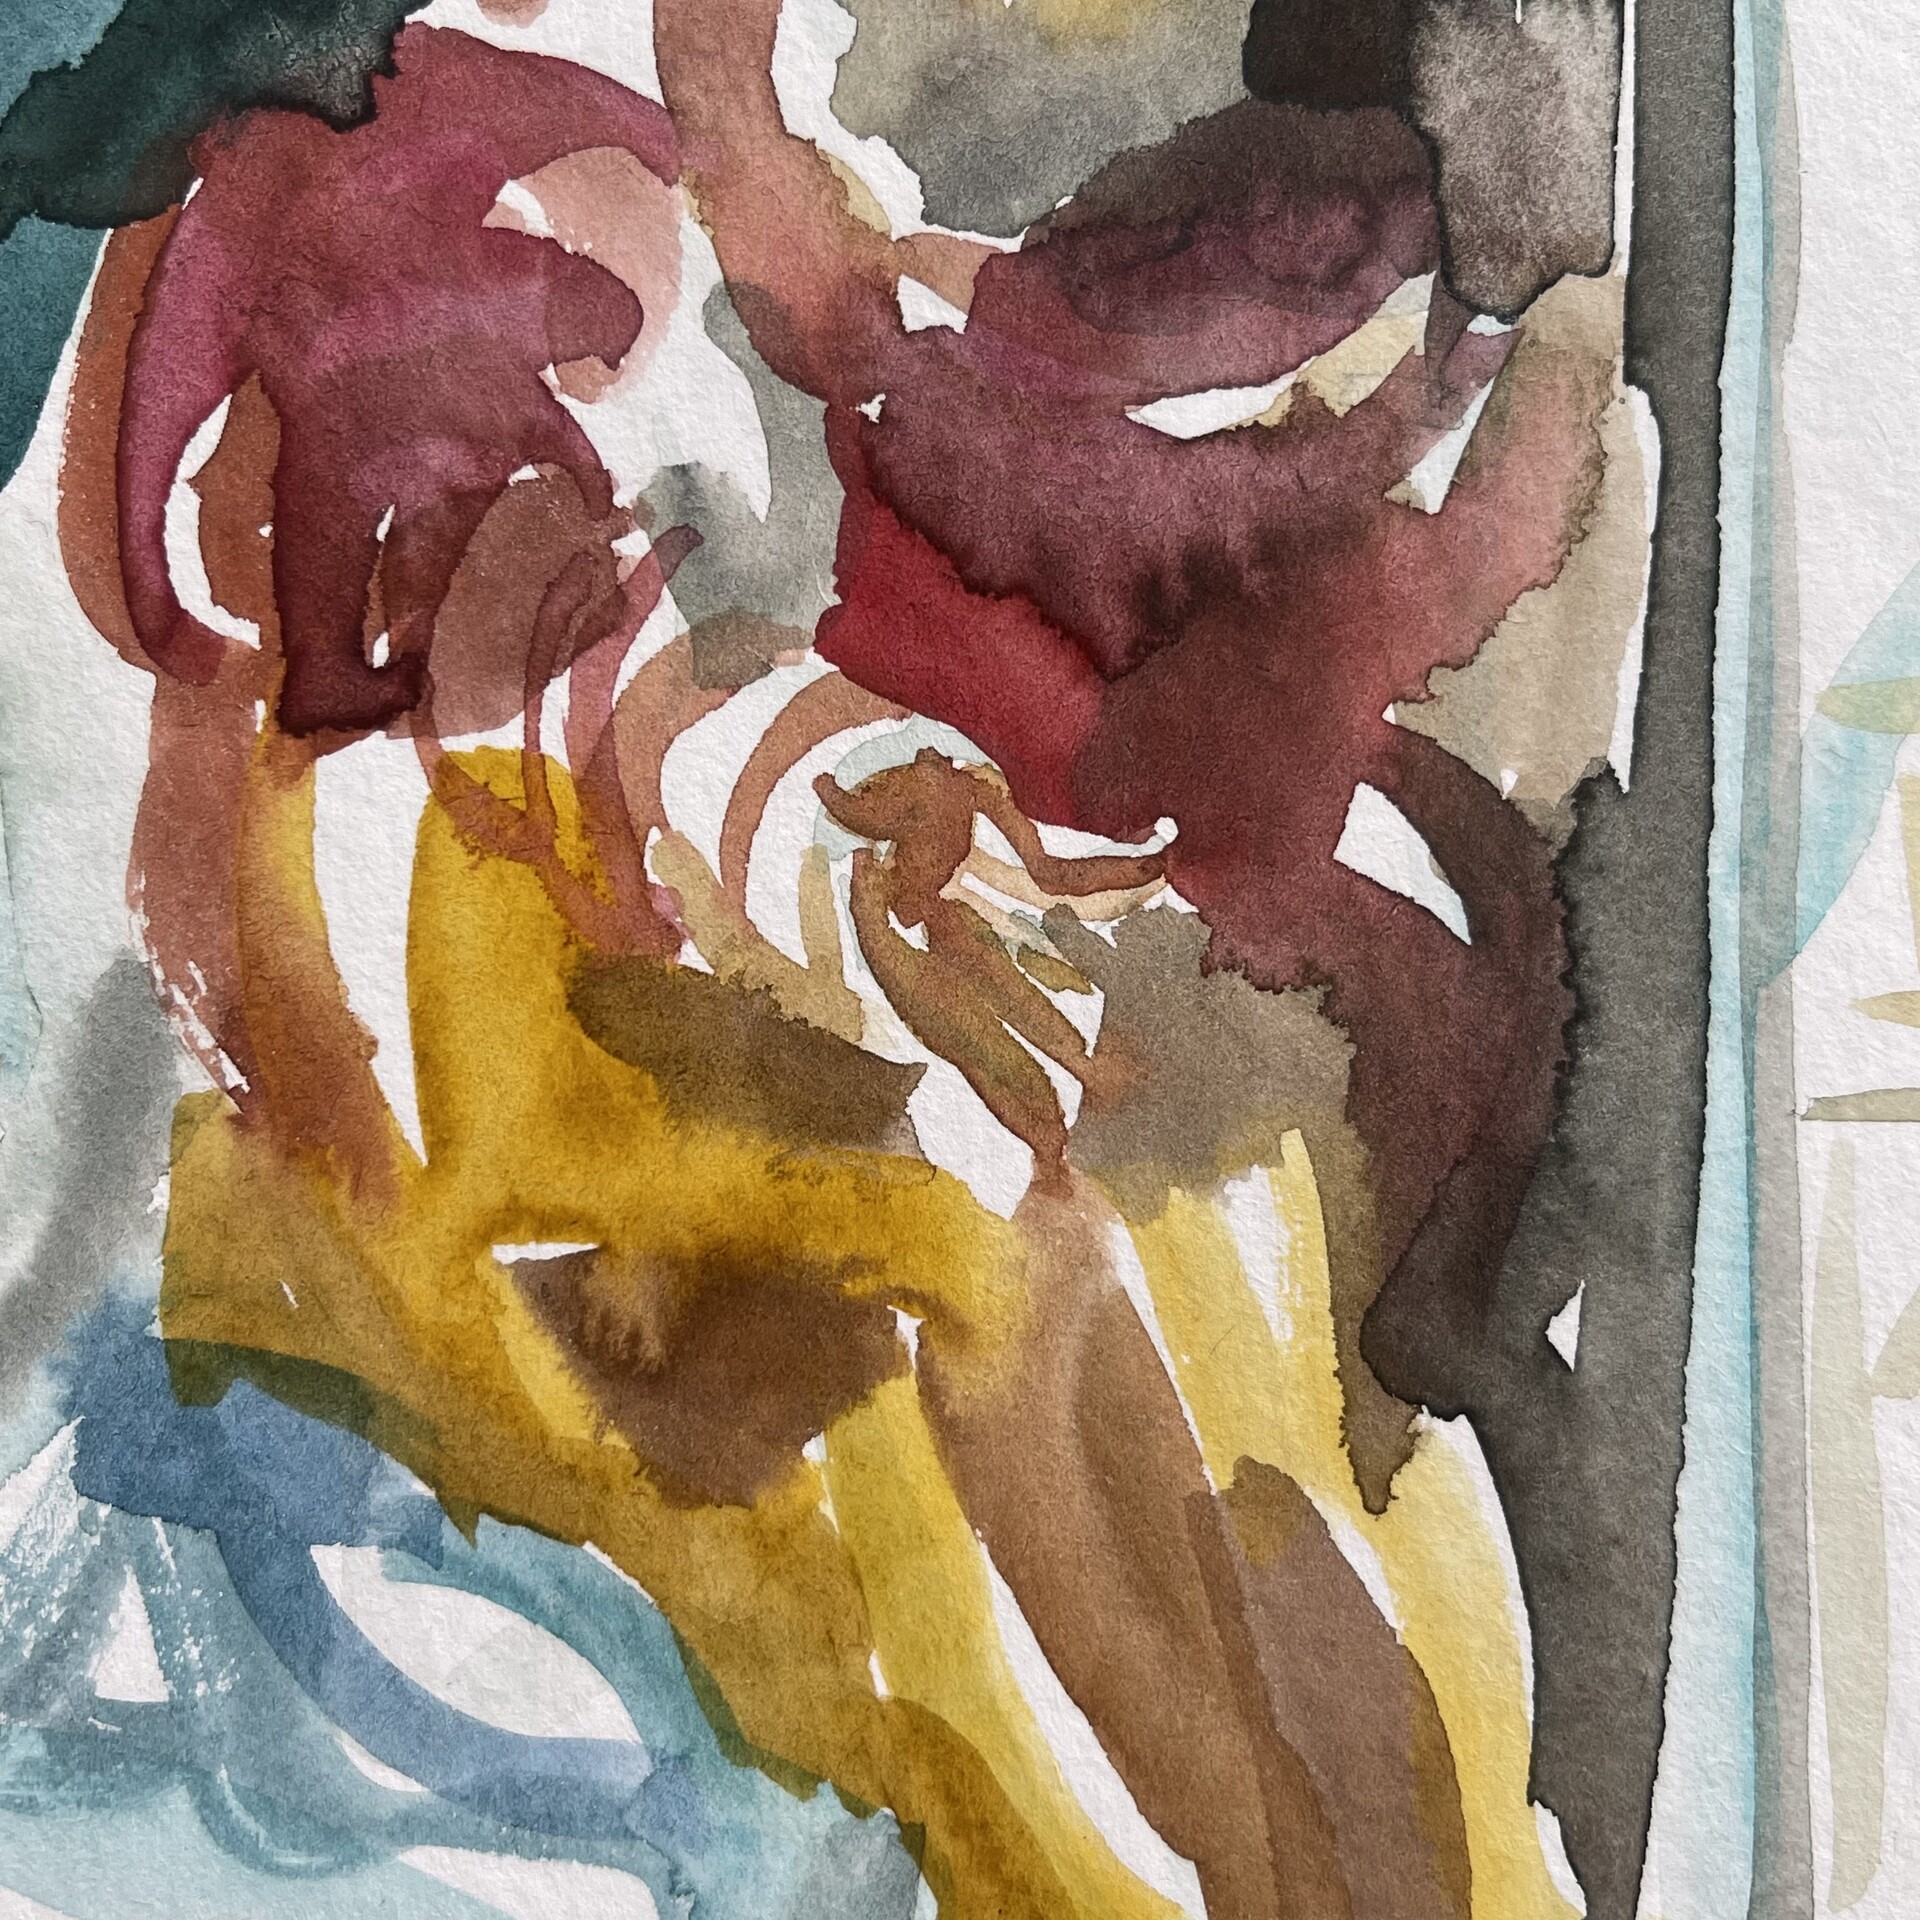 “Bathsheba at her Bath” inspired by Paolo Veronese “Bathsheba at her Bath” (1575), 29,7 x 21 cm, watercolour on paper, 2021, detail